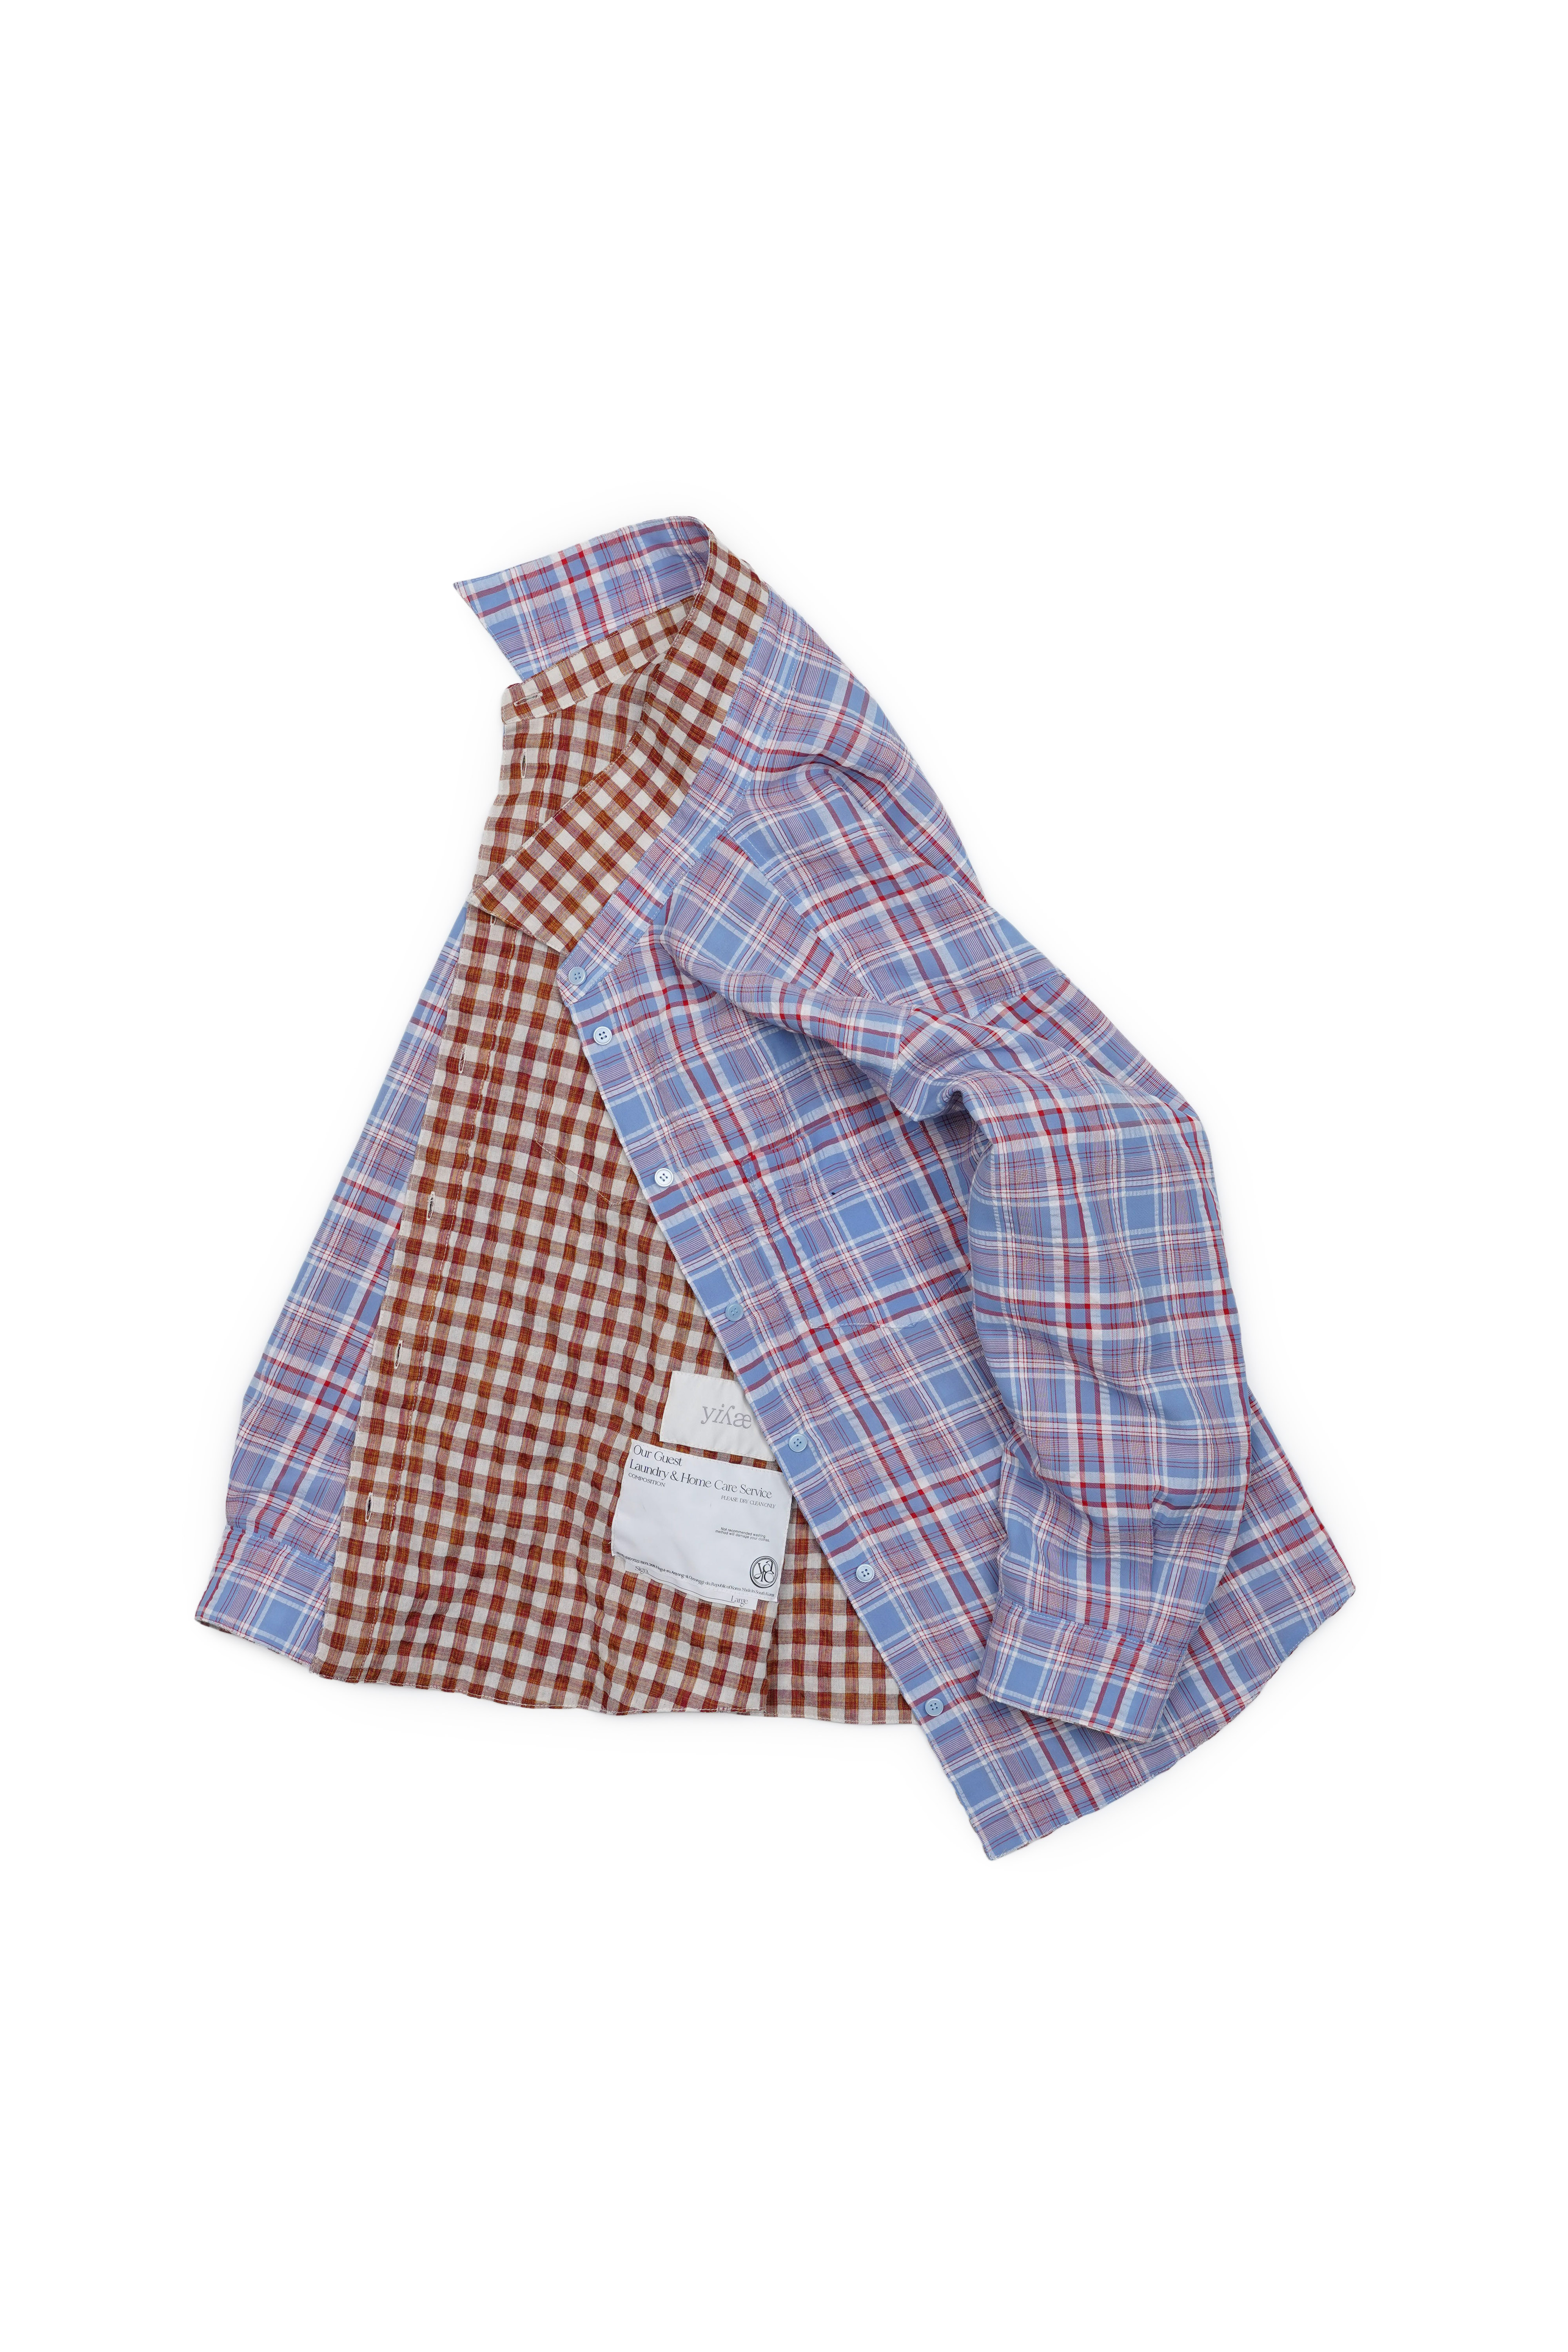 Reversible Check Shirts _ Blue Red